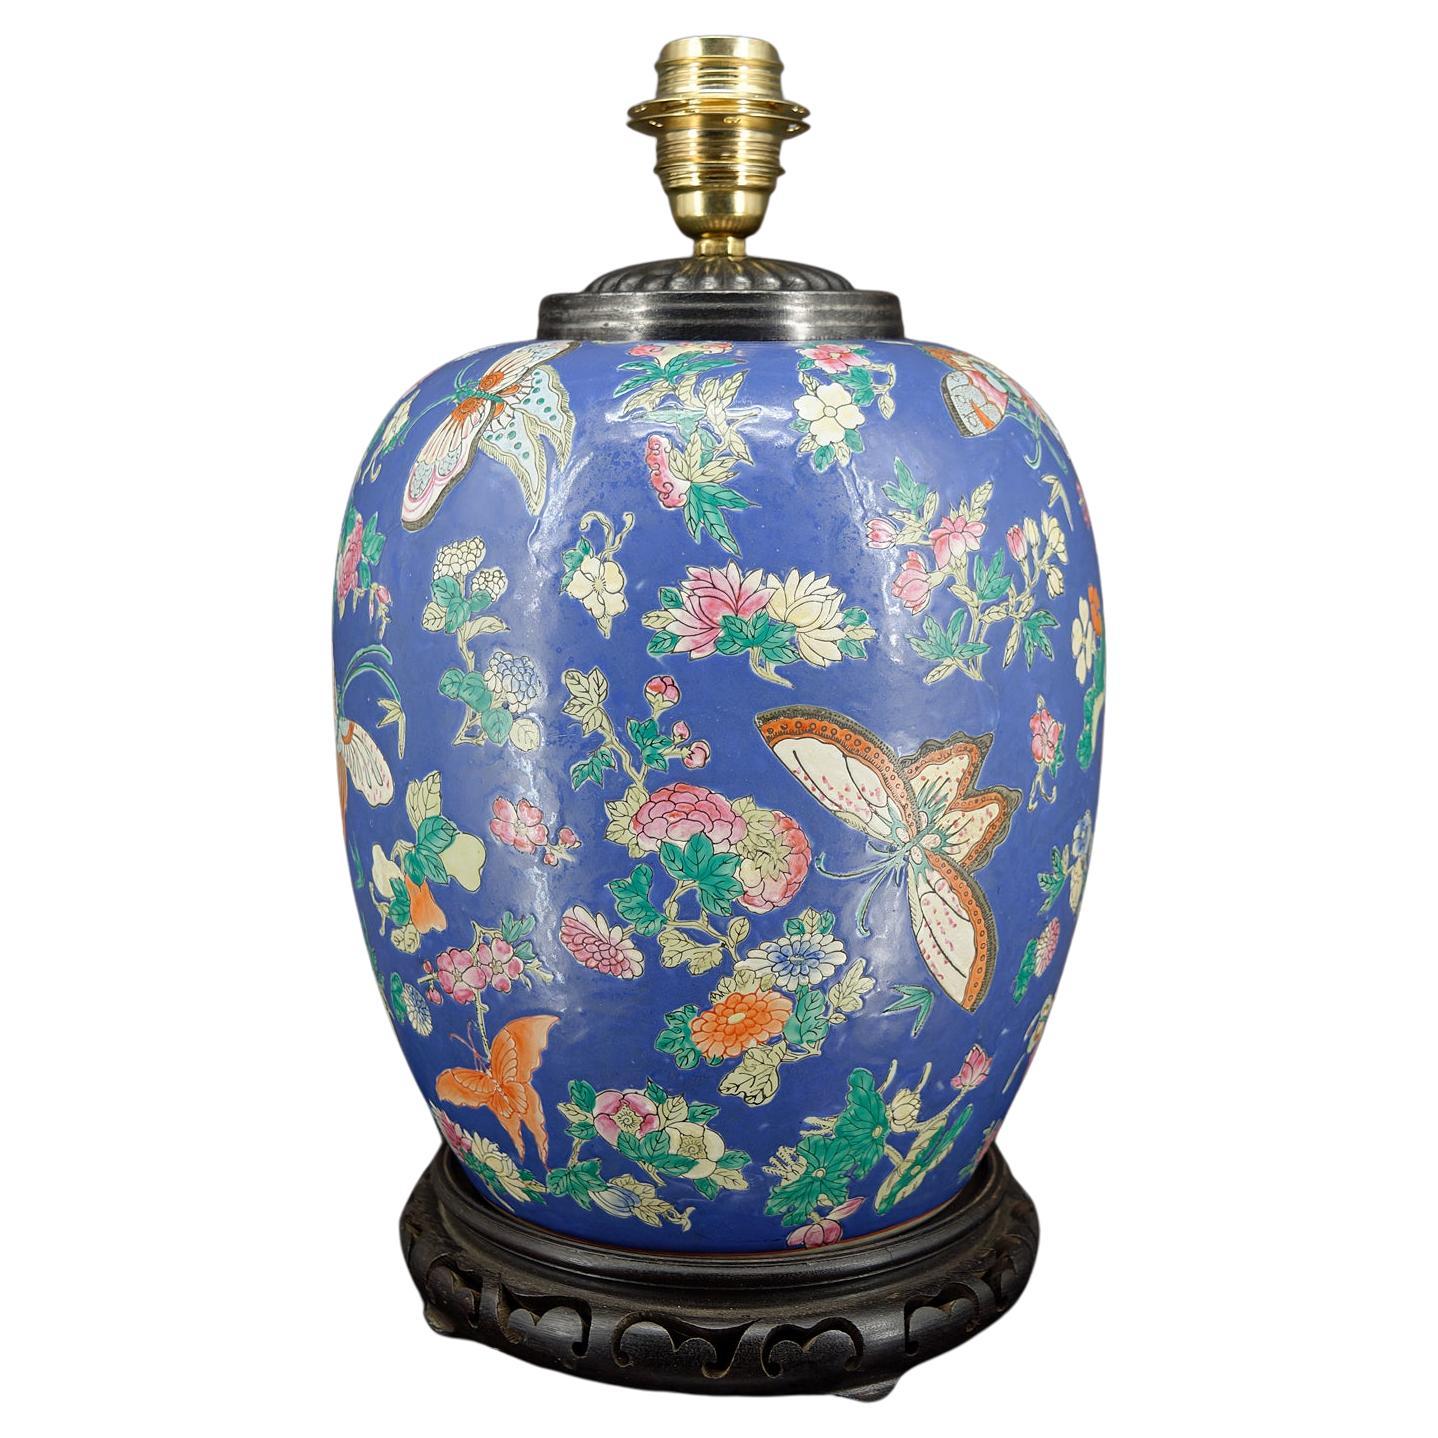 Important Chinese blue ceramic lamp with butterflies, Quing Thongzhi, China 1865